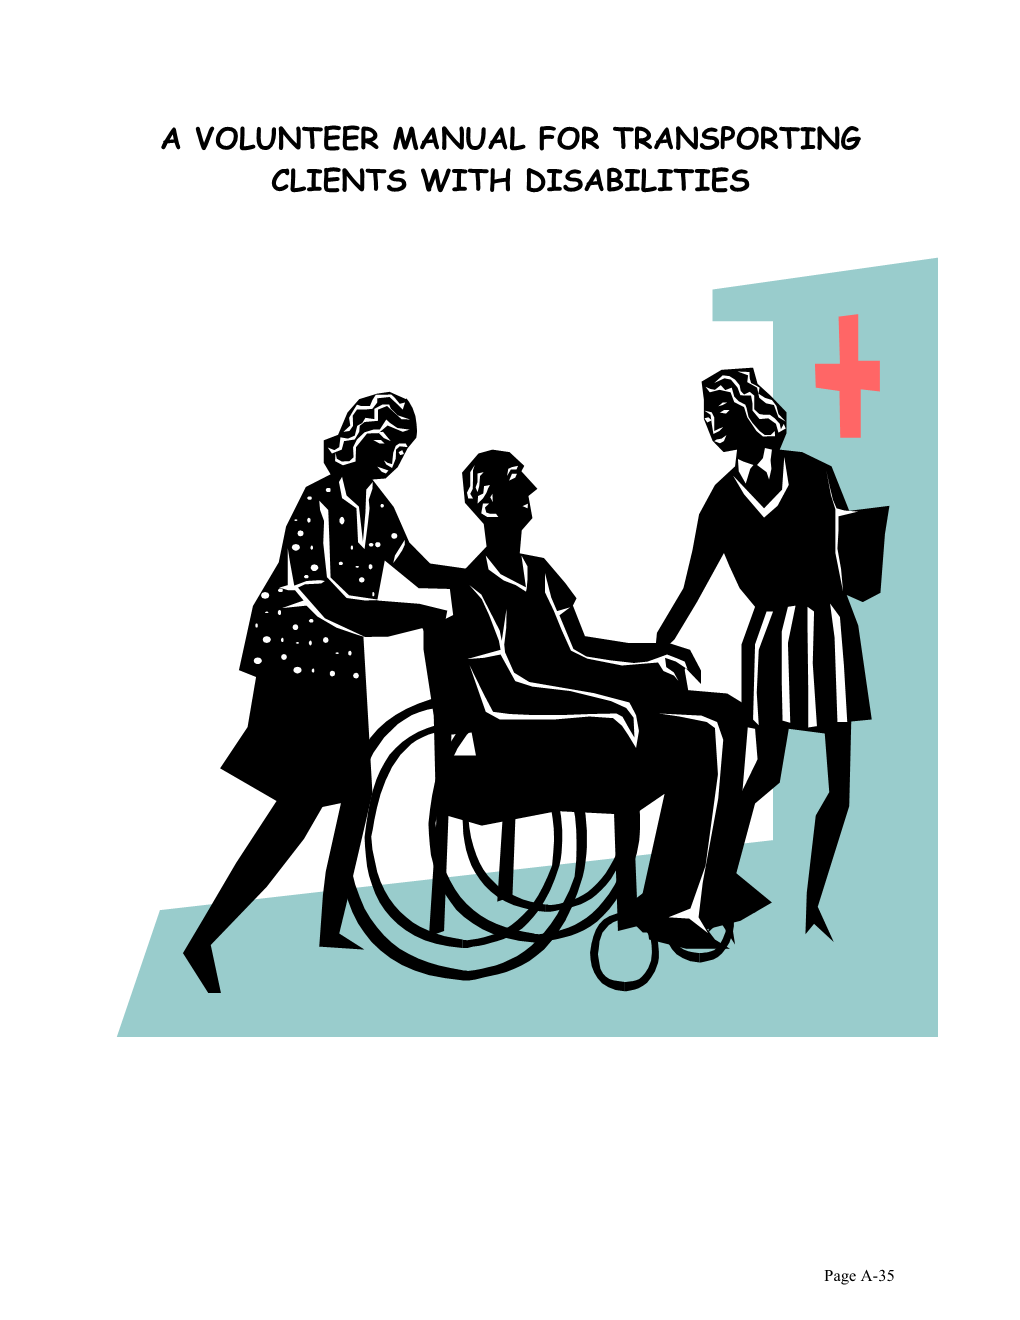 The Volunteer Manual for Transporting Clients with Disabilities